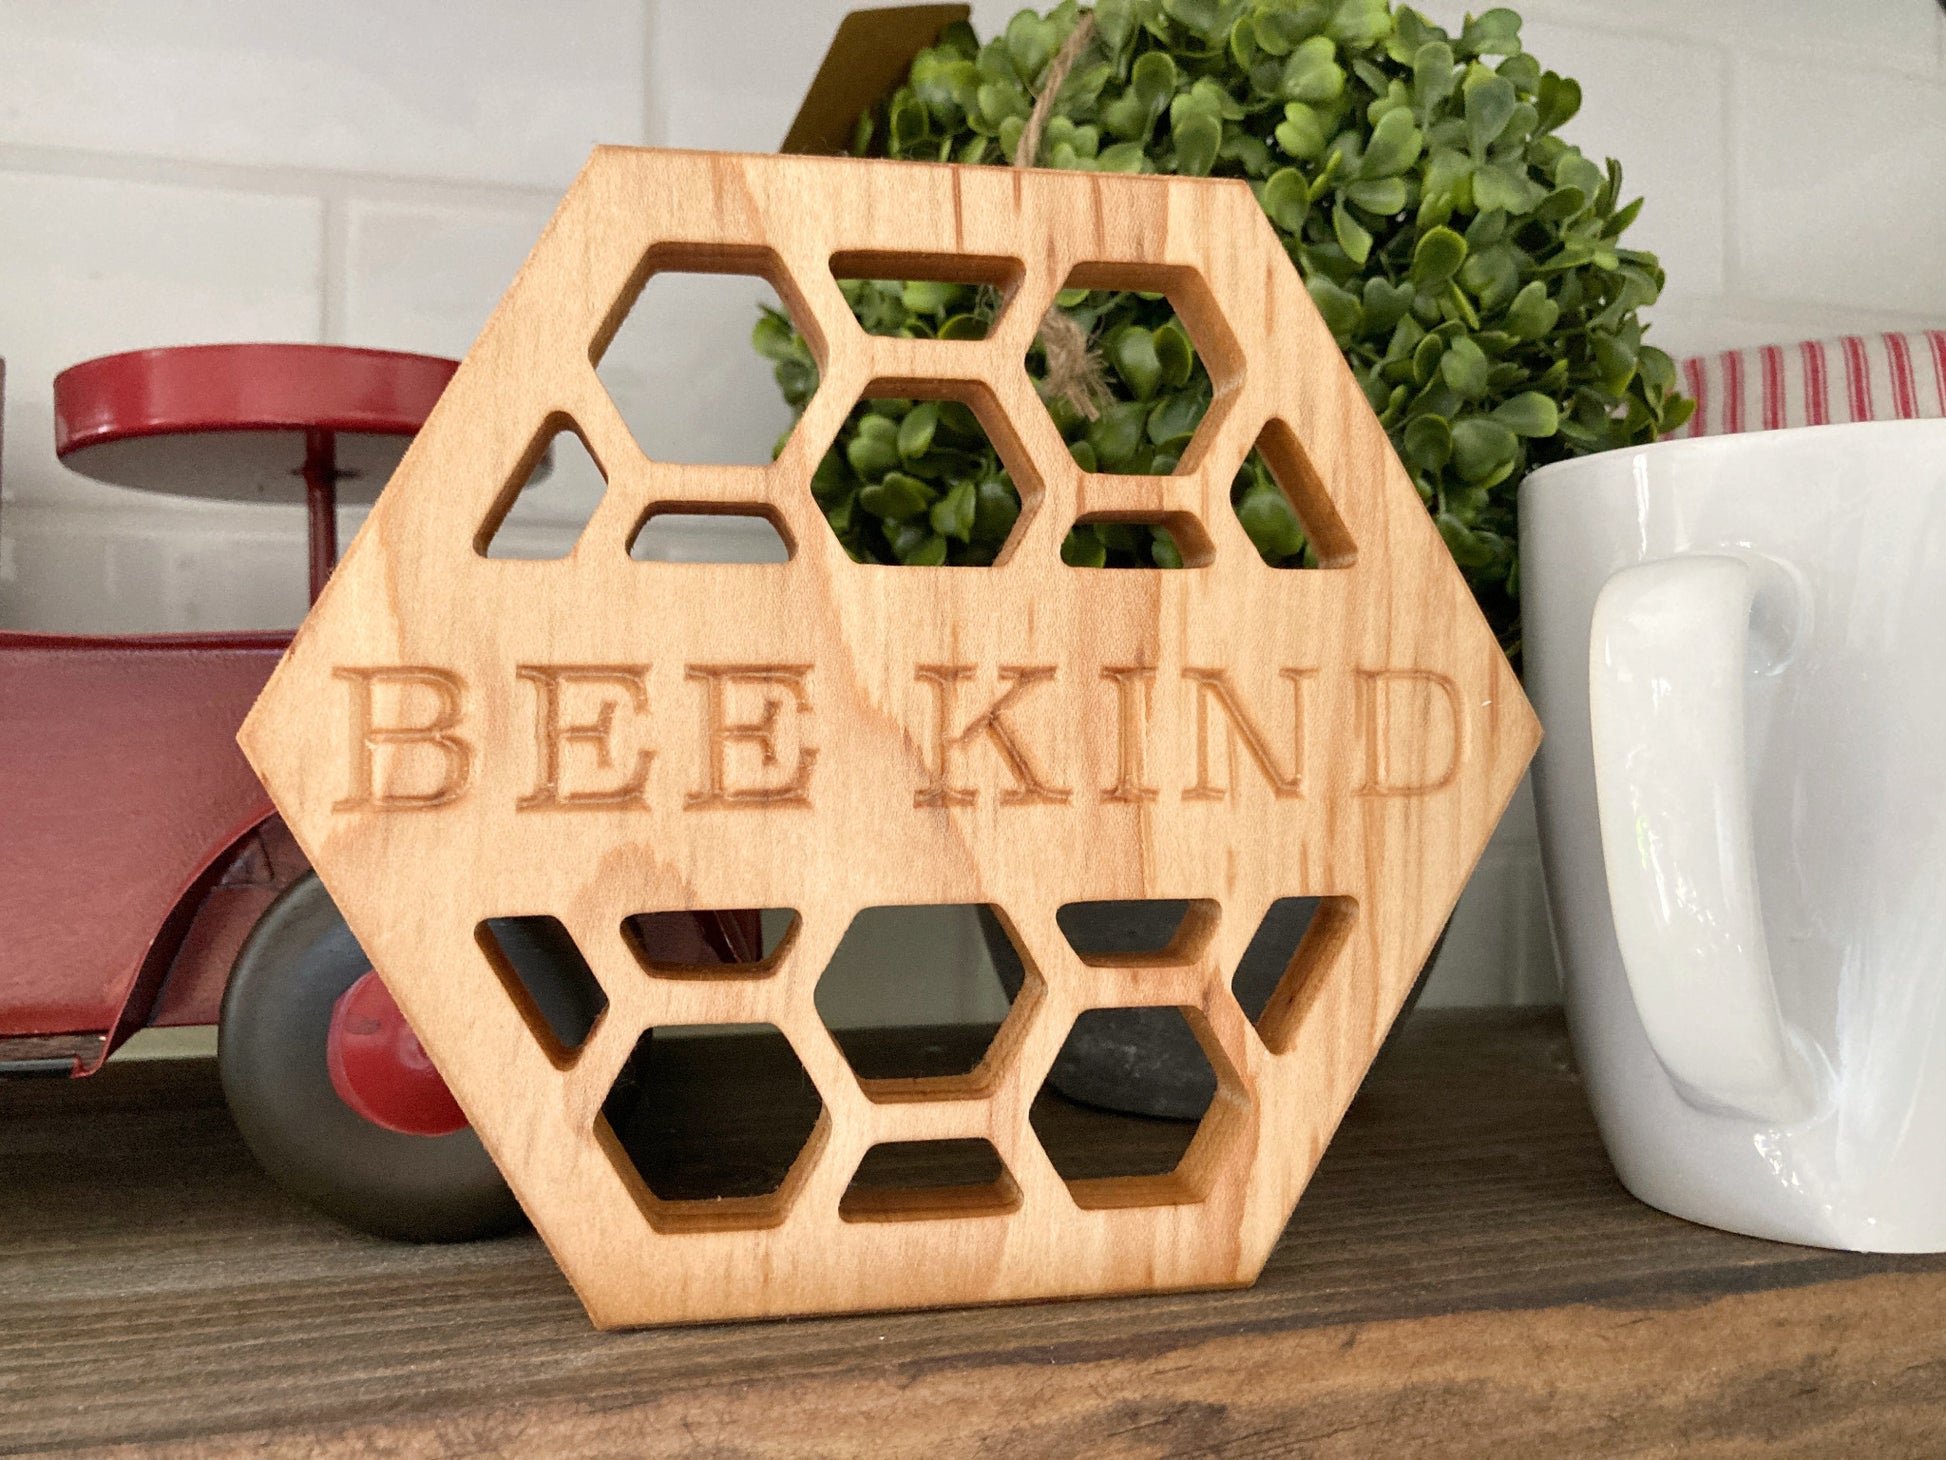 Solid maple wood honeycomb shaped trivet. Bee Kind is carved into the middle of the hot plate and surrounded by honeycomb cutouts